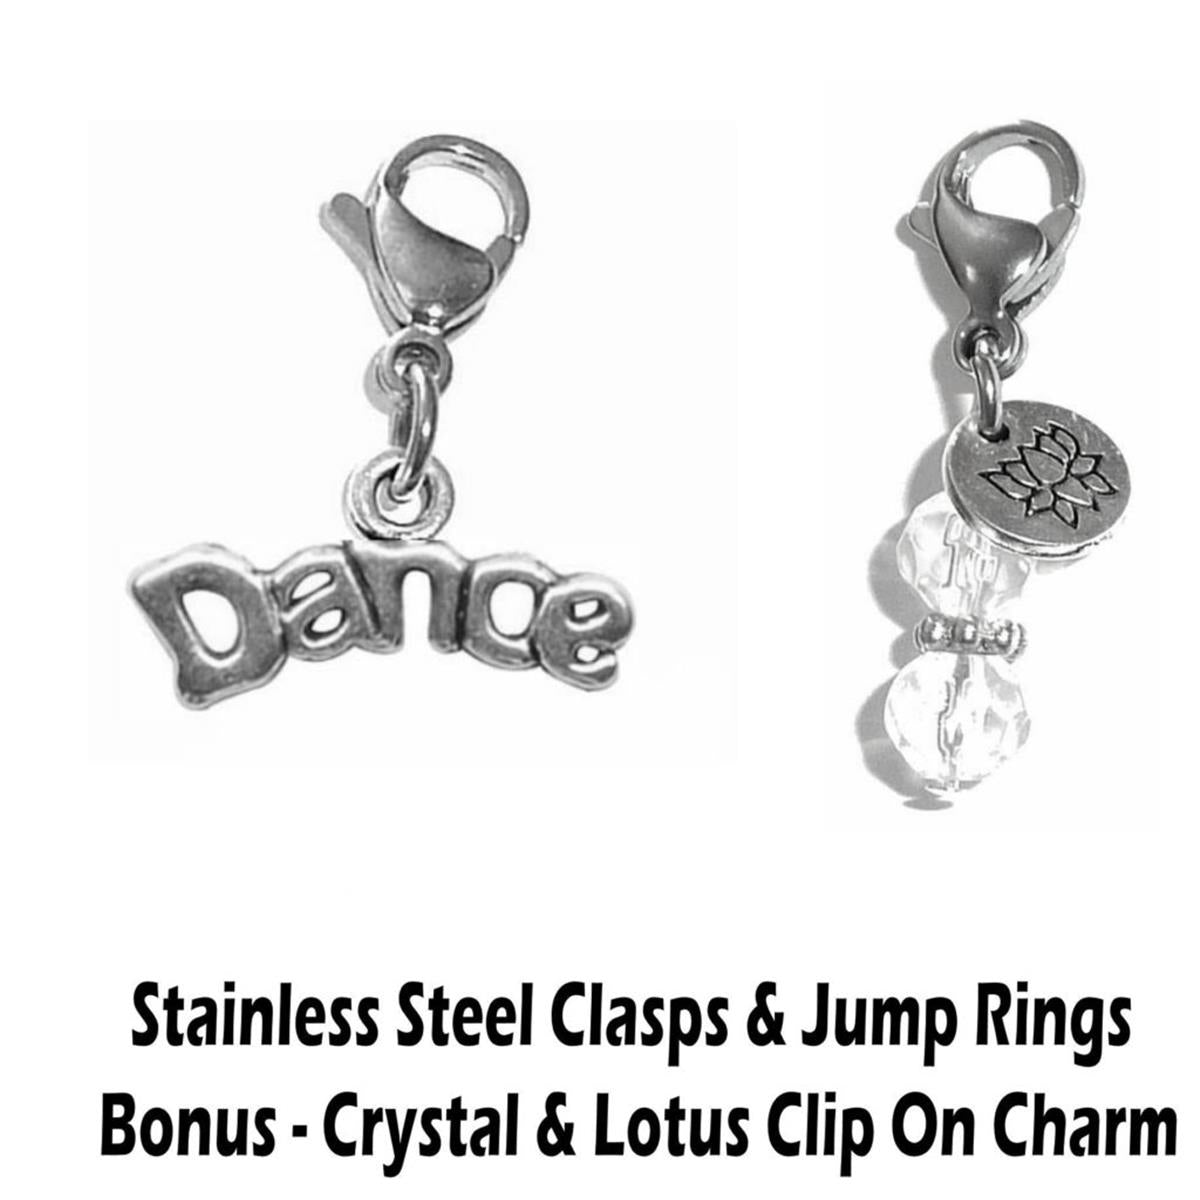 Dance Clip On Charms - Whimsical Charms Clip On Anywhere